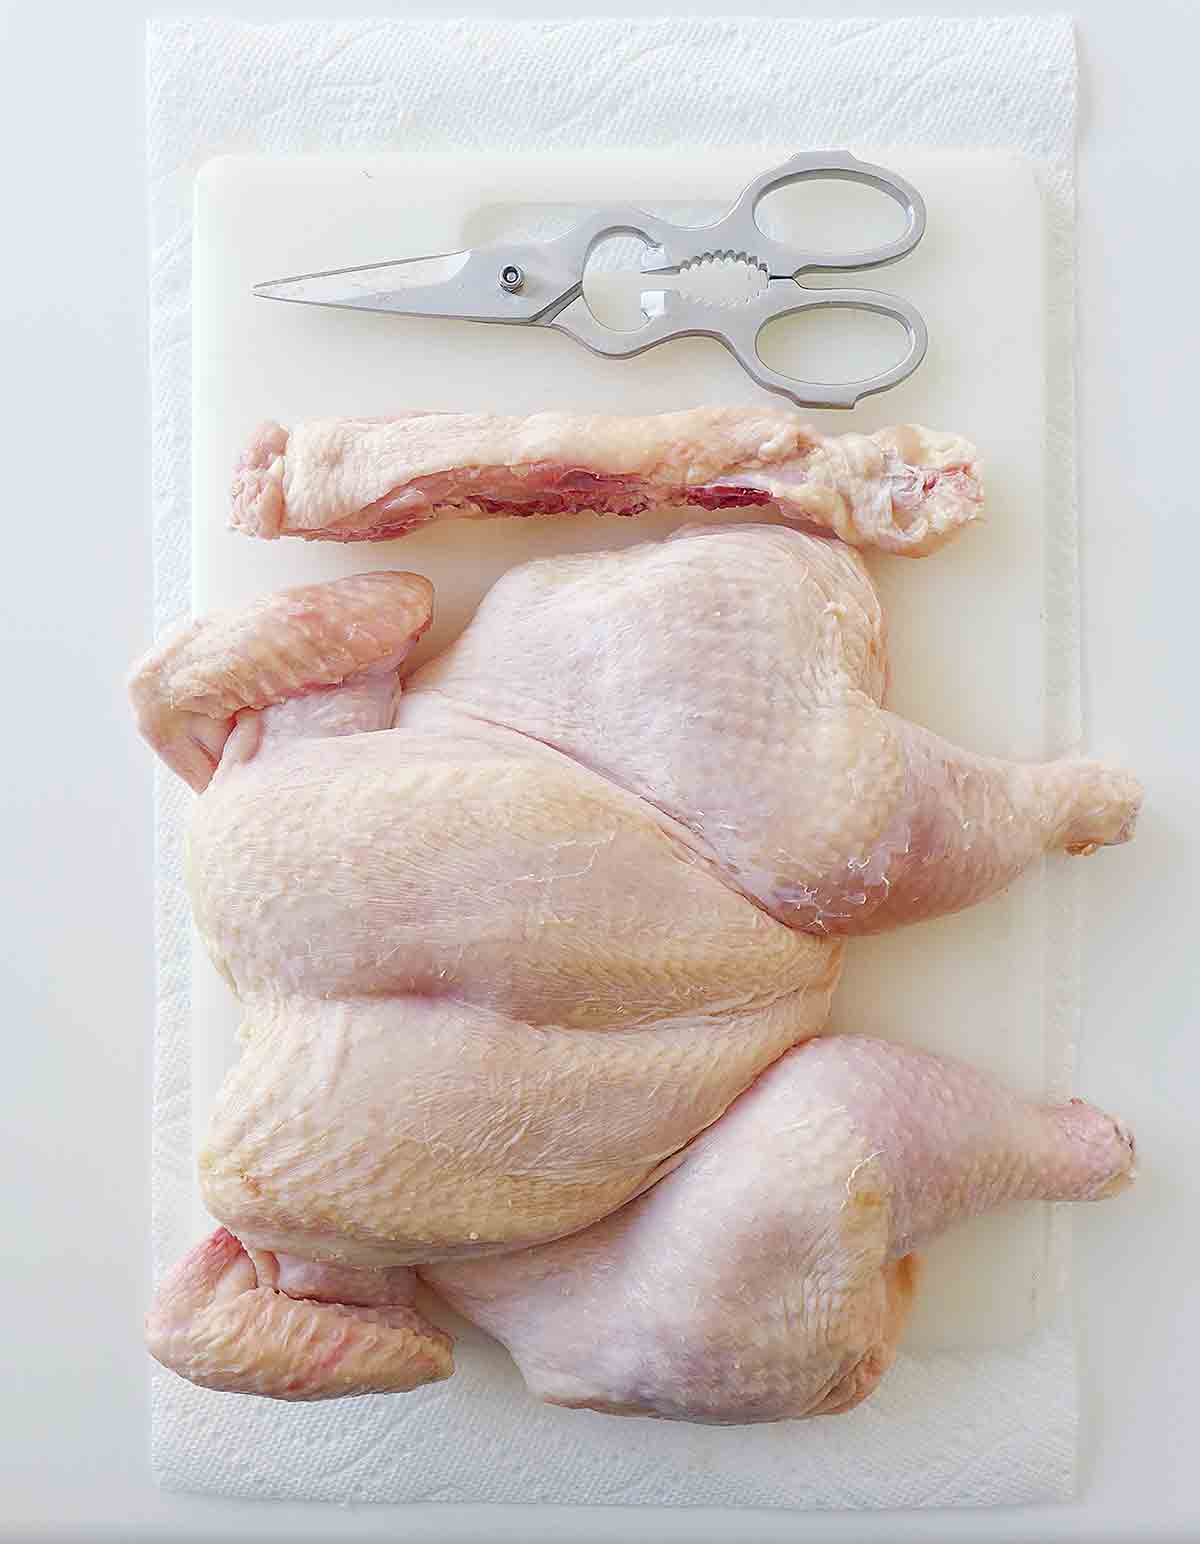 A finished spatchcocked chicken on a cutting board with a pair of kitchen shears beside it.